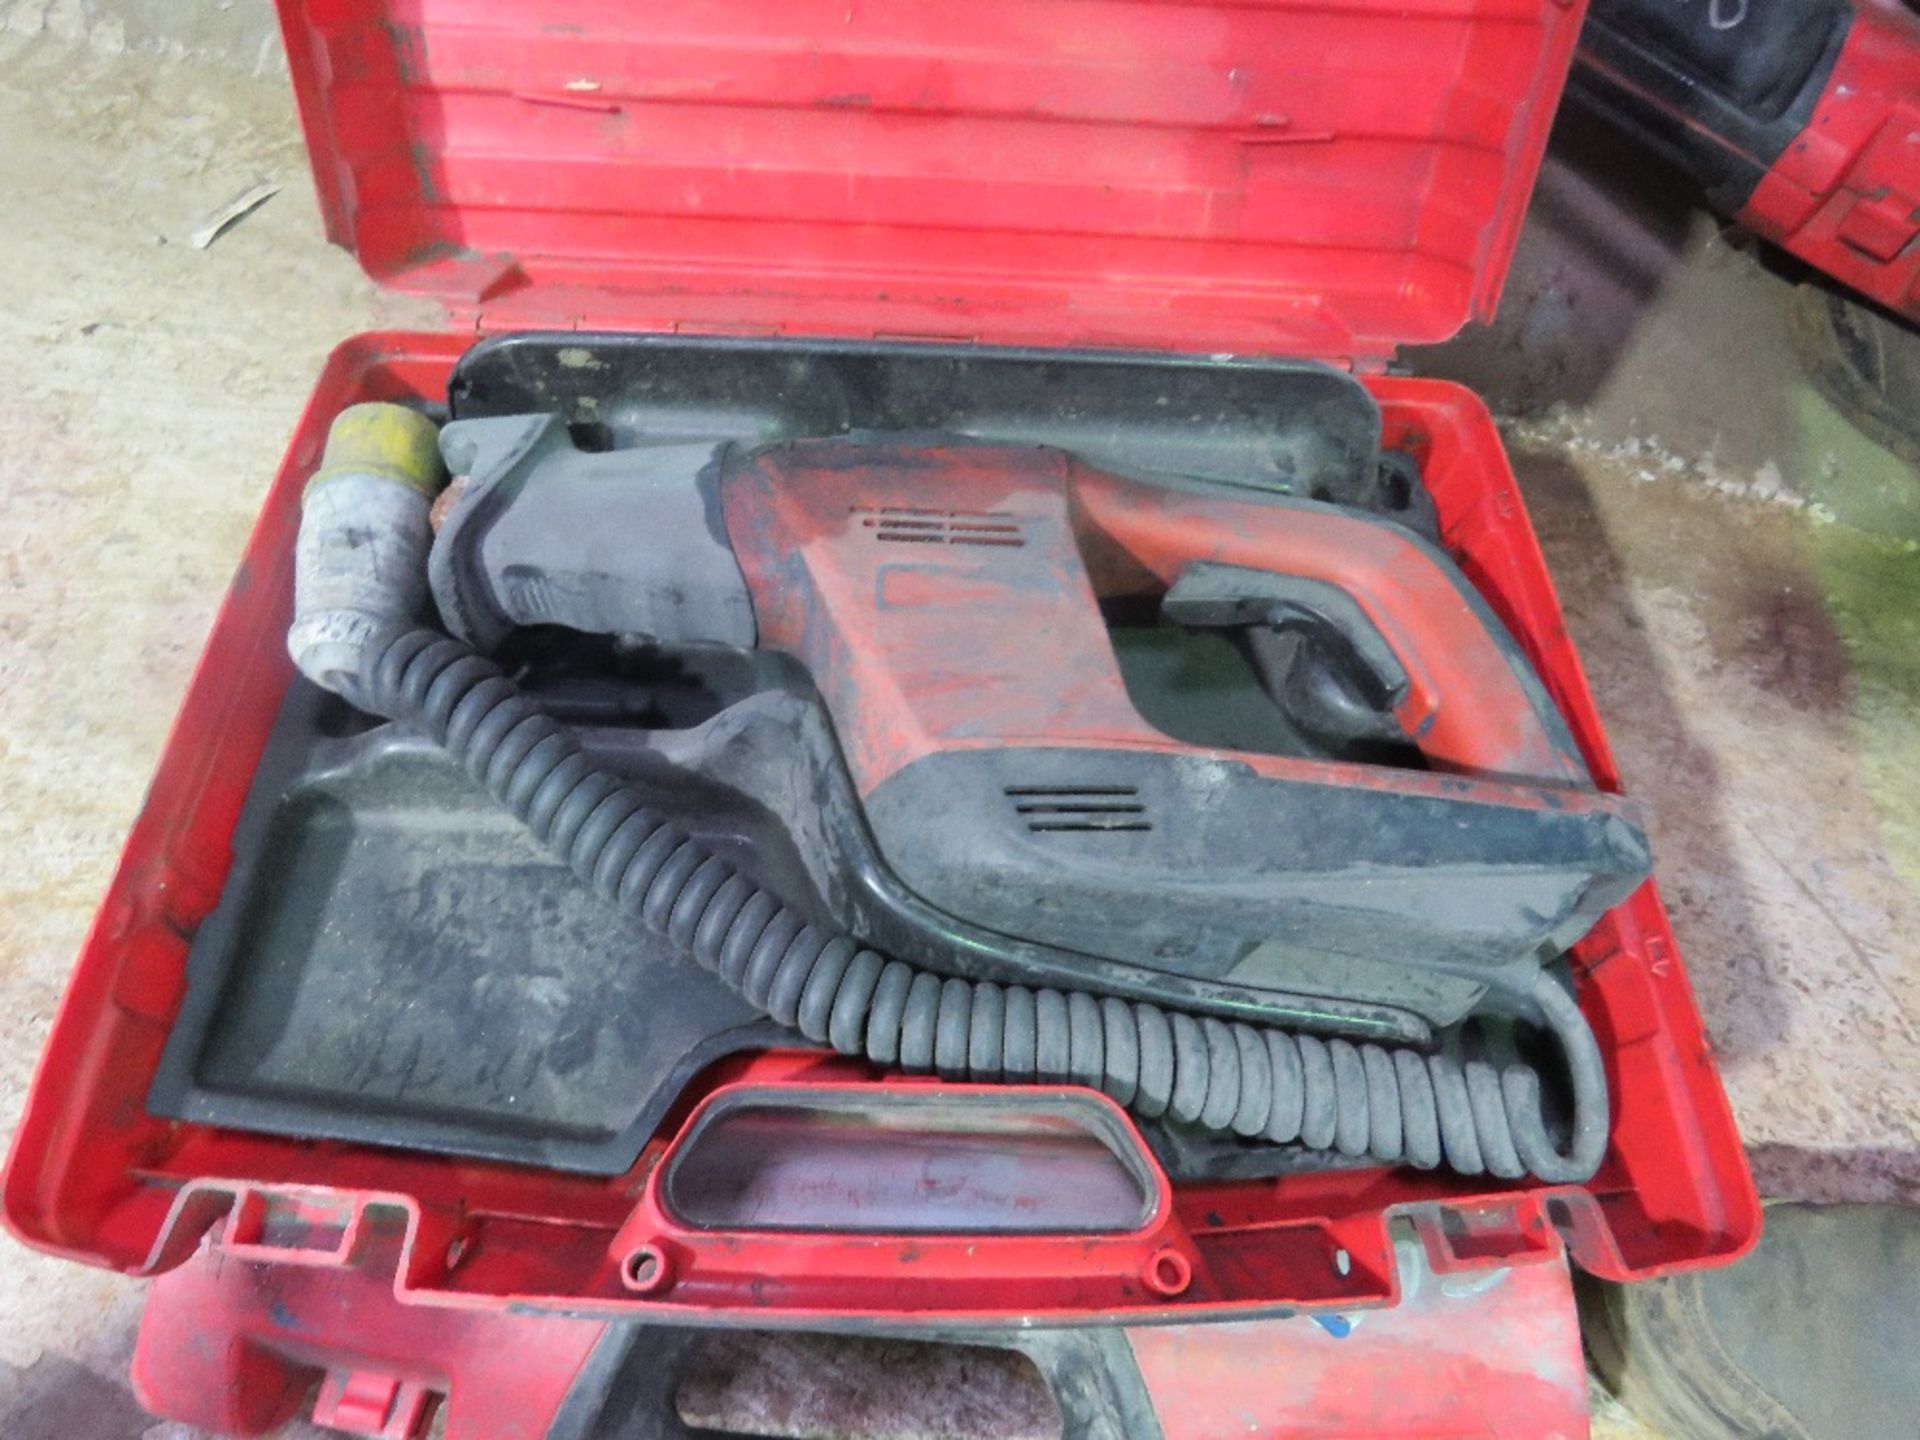 4 X HILTI 110VOLT POWERED RECIPROCATING SAWS. - Image 4 of 5